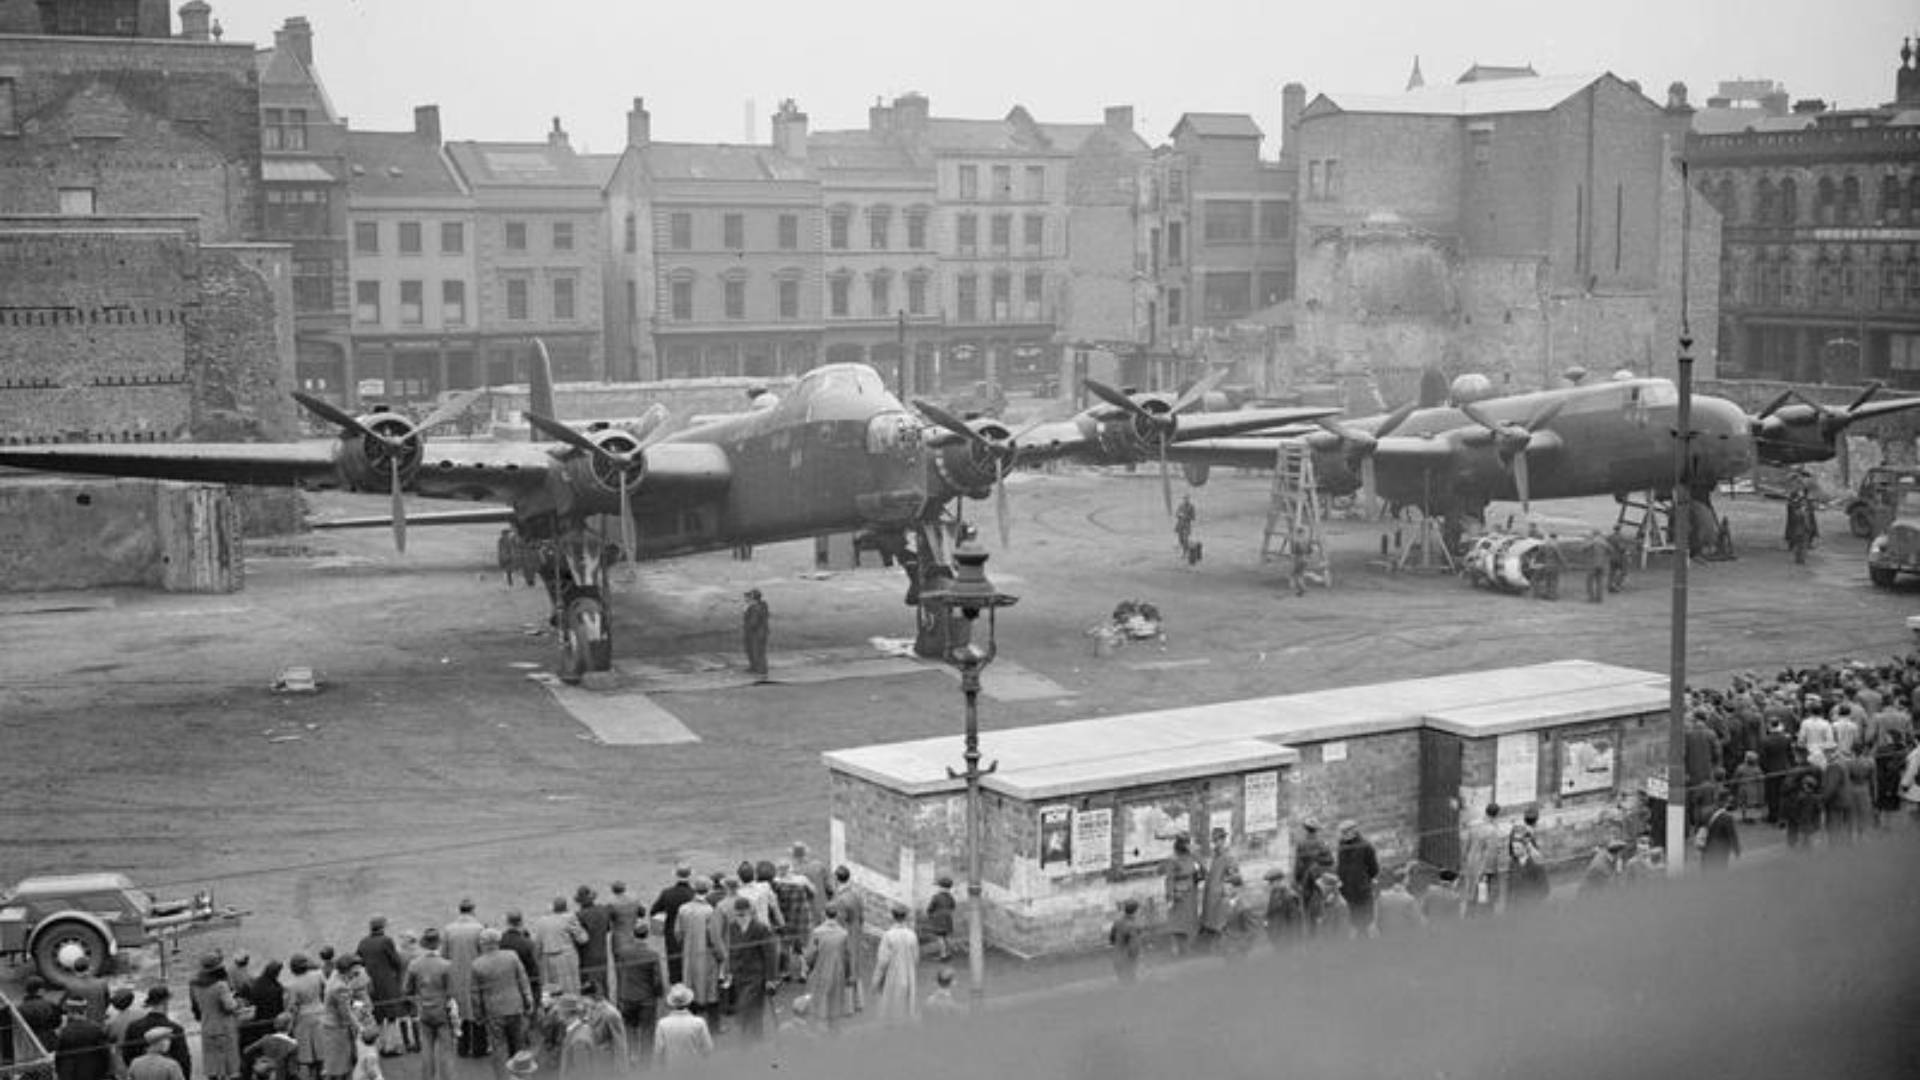 Short Stirling and Handley Page Halifax in High Street, Belfast during Wings For Victory Savings Week on 30th April 1943